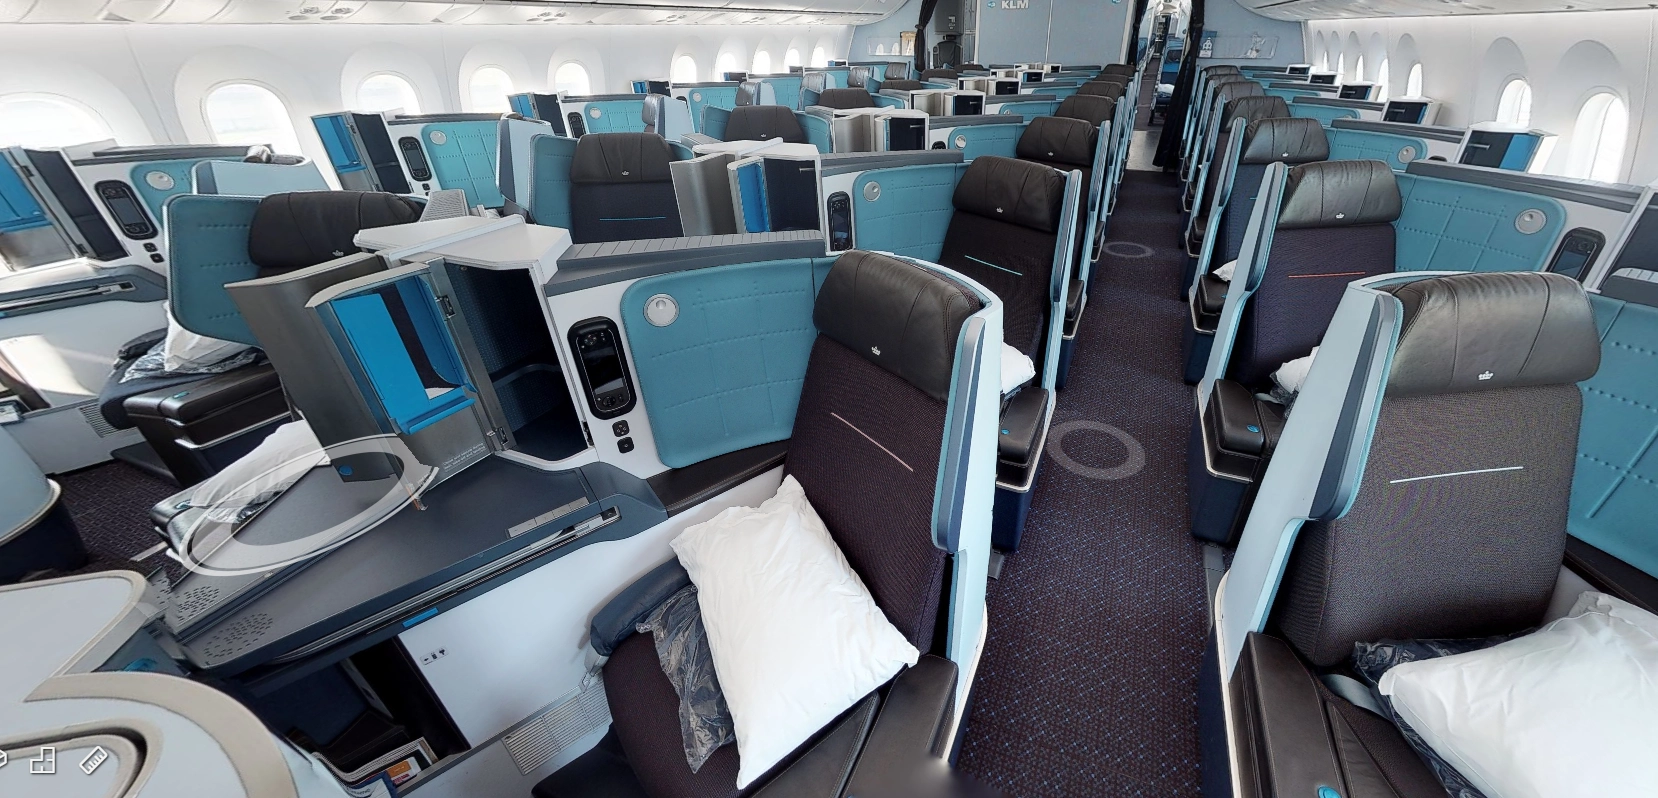 KLM New World Business Class Cabins (2023).